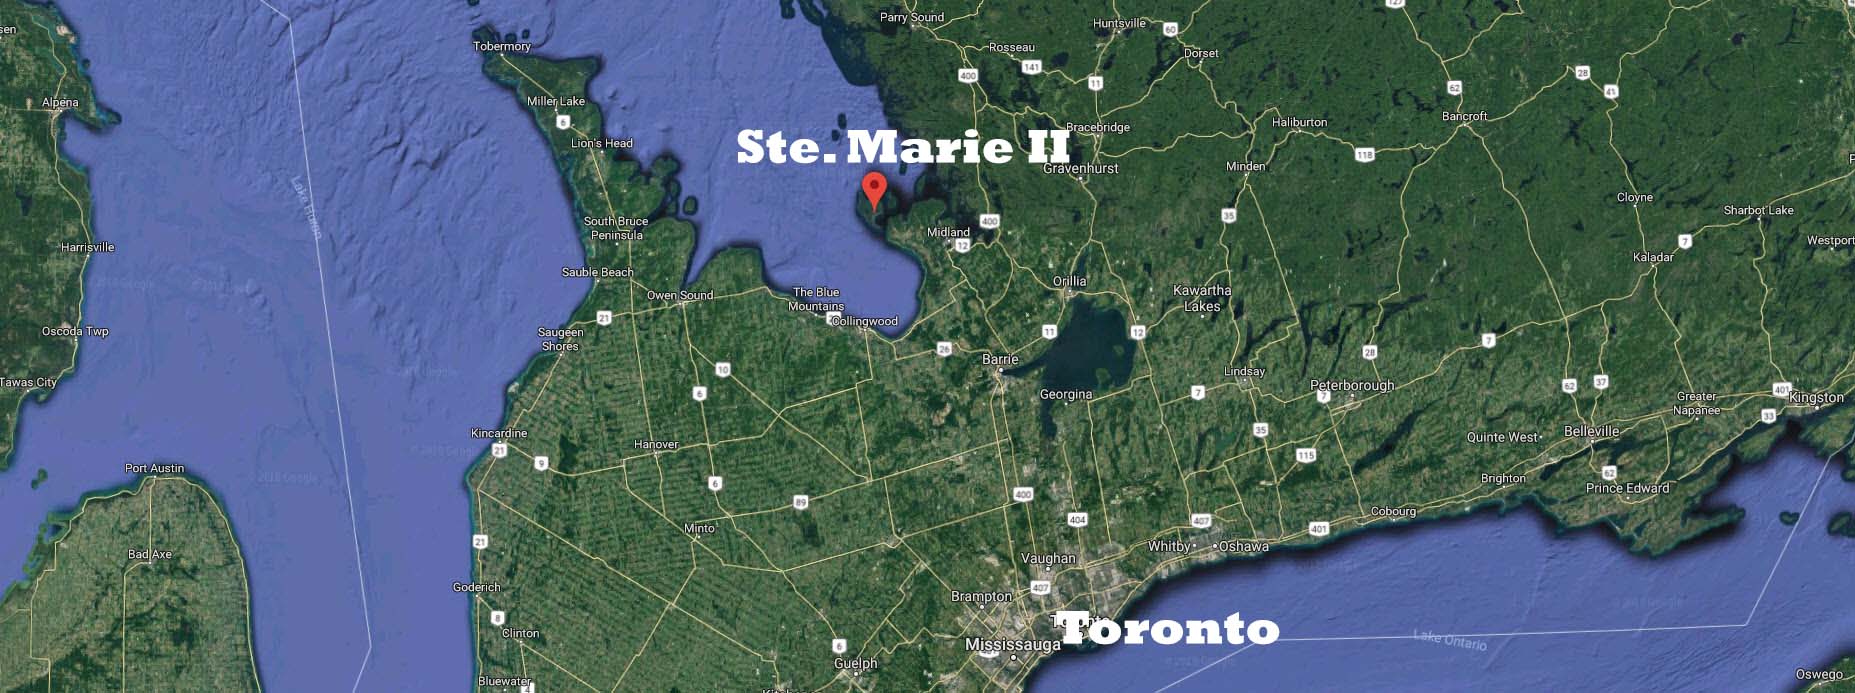 Colour google map of Southern Ontario with Ste Marie II and Toronto outlined in white letters.